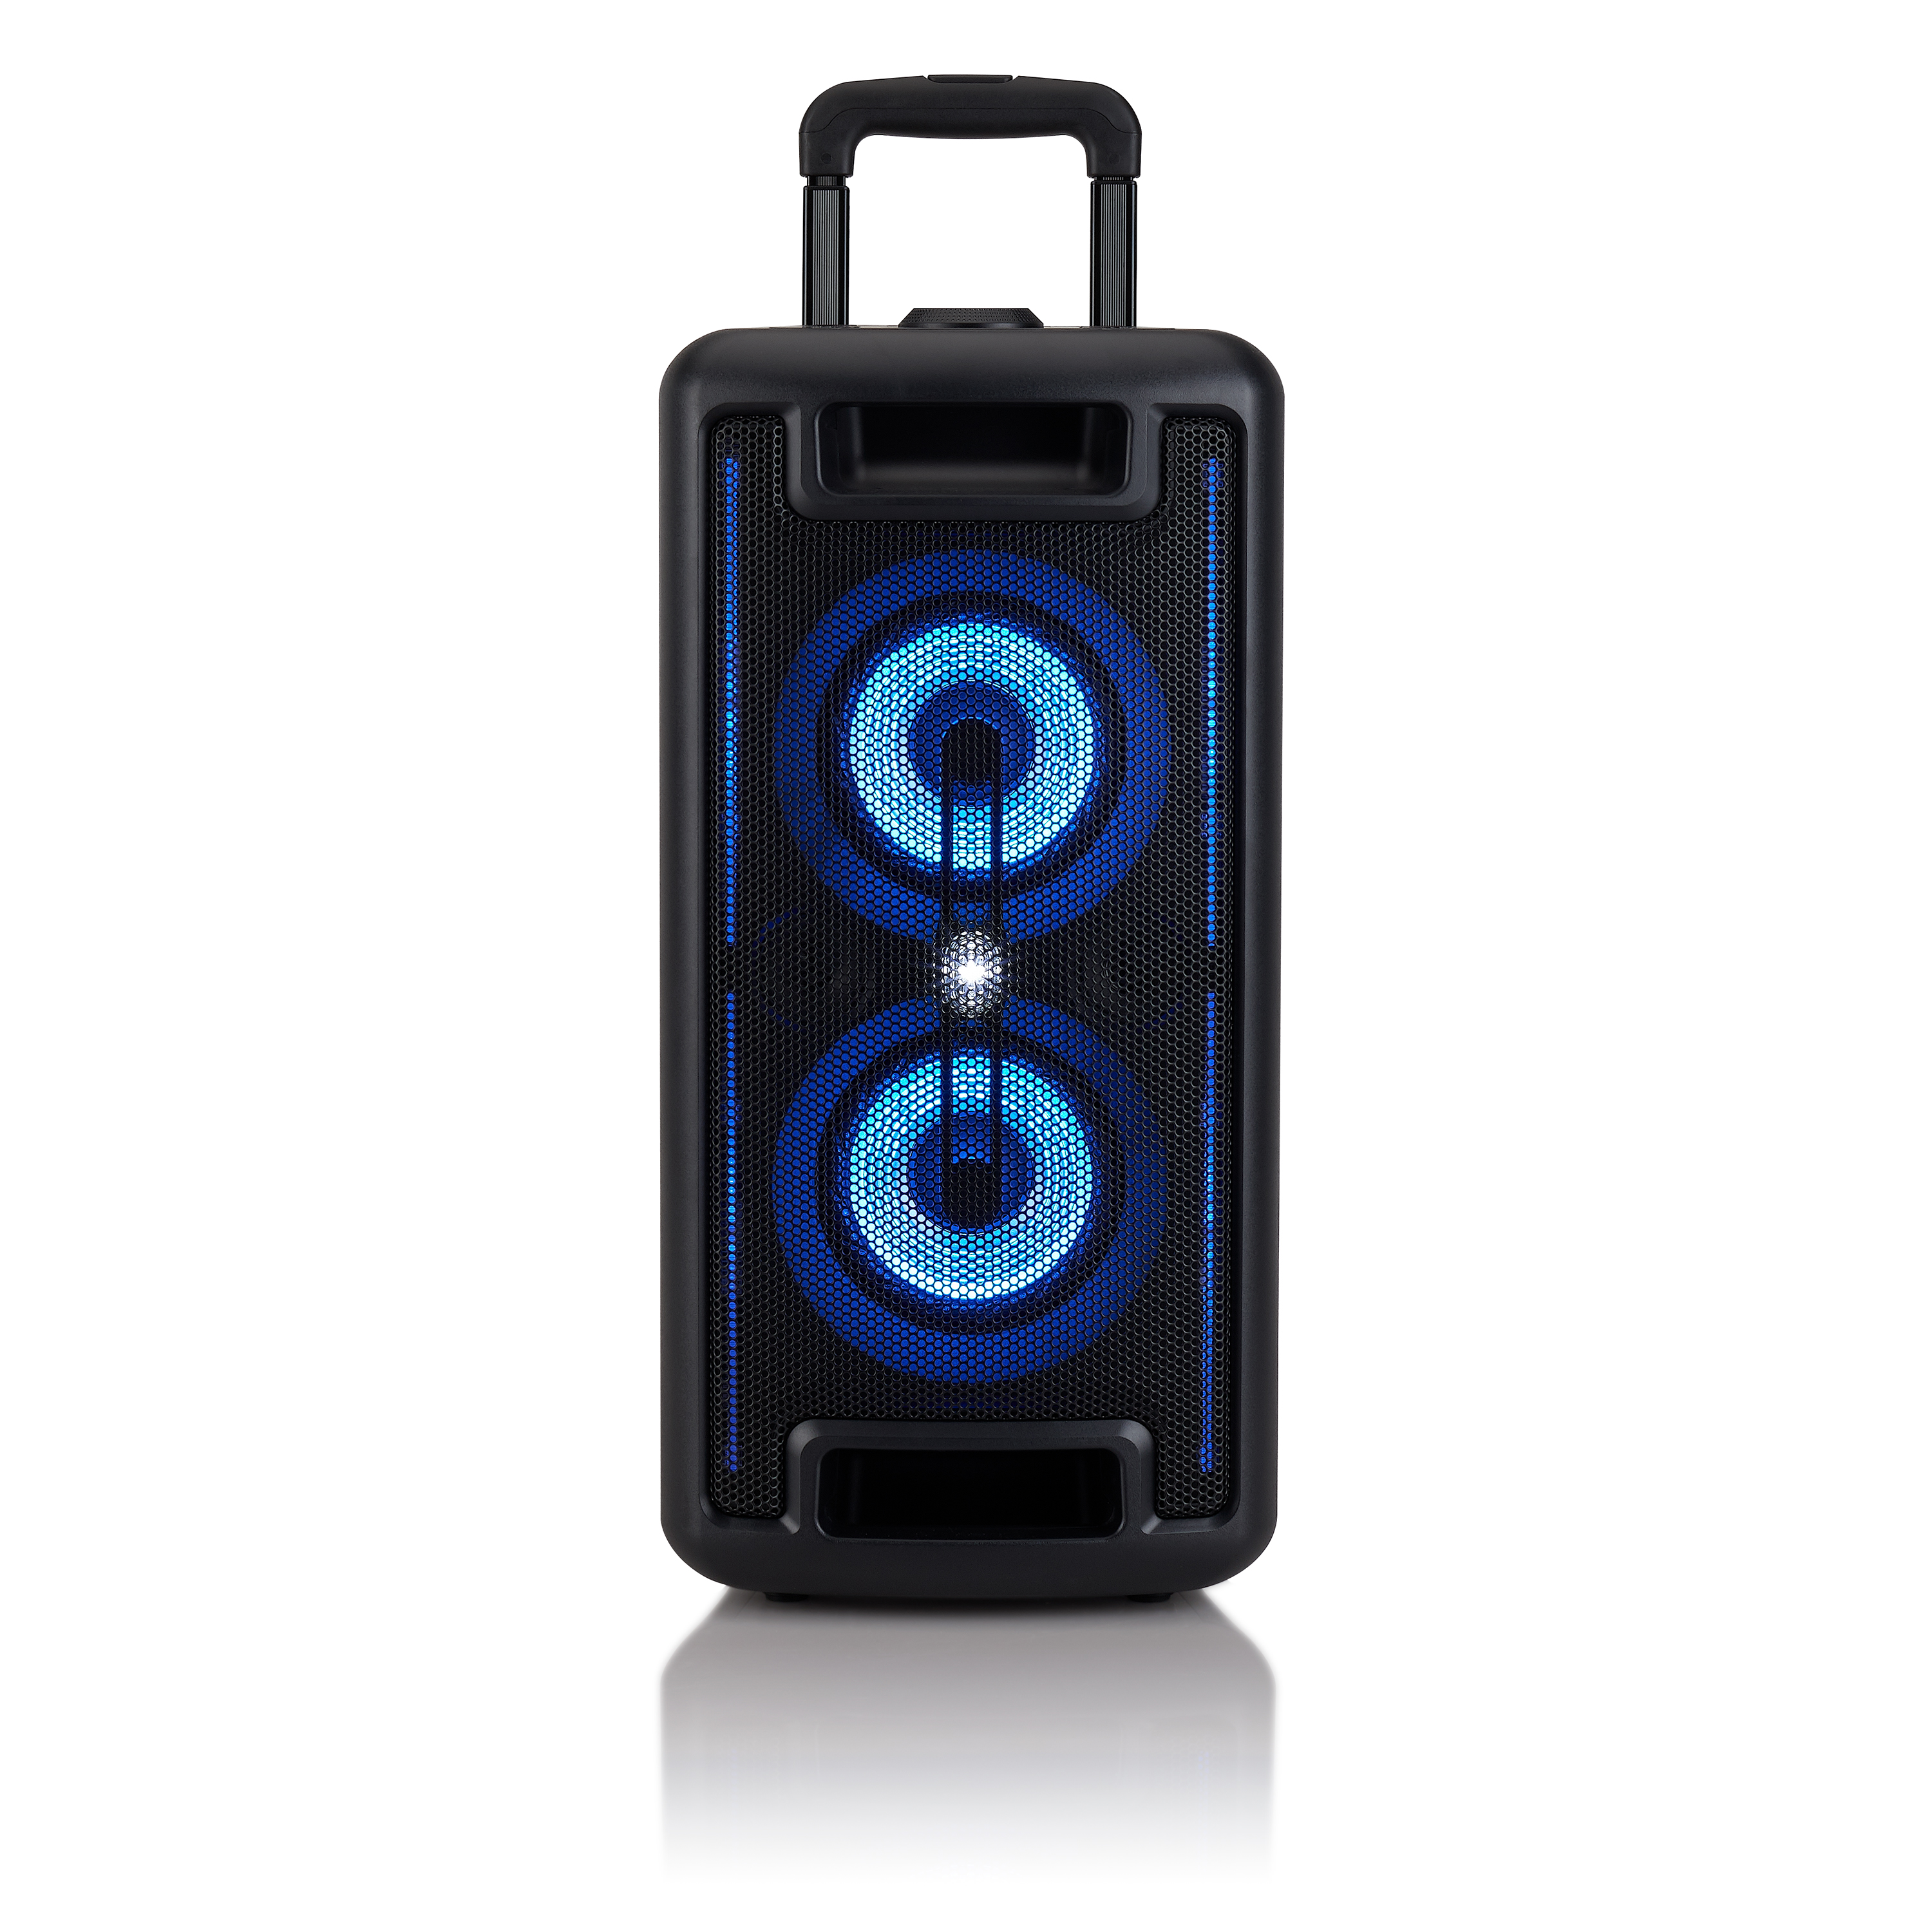 onn. Large Party Speaker with LED Lighting - image 1 of 6